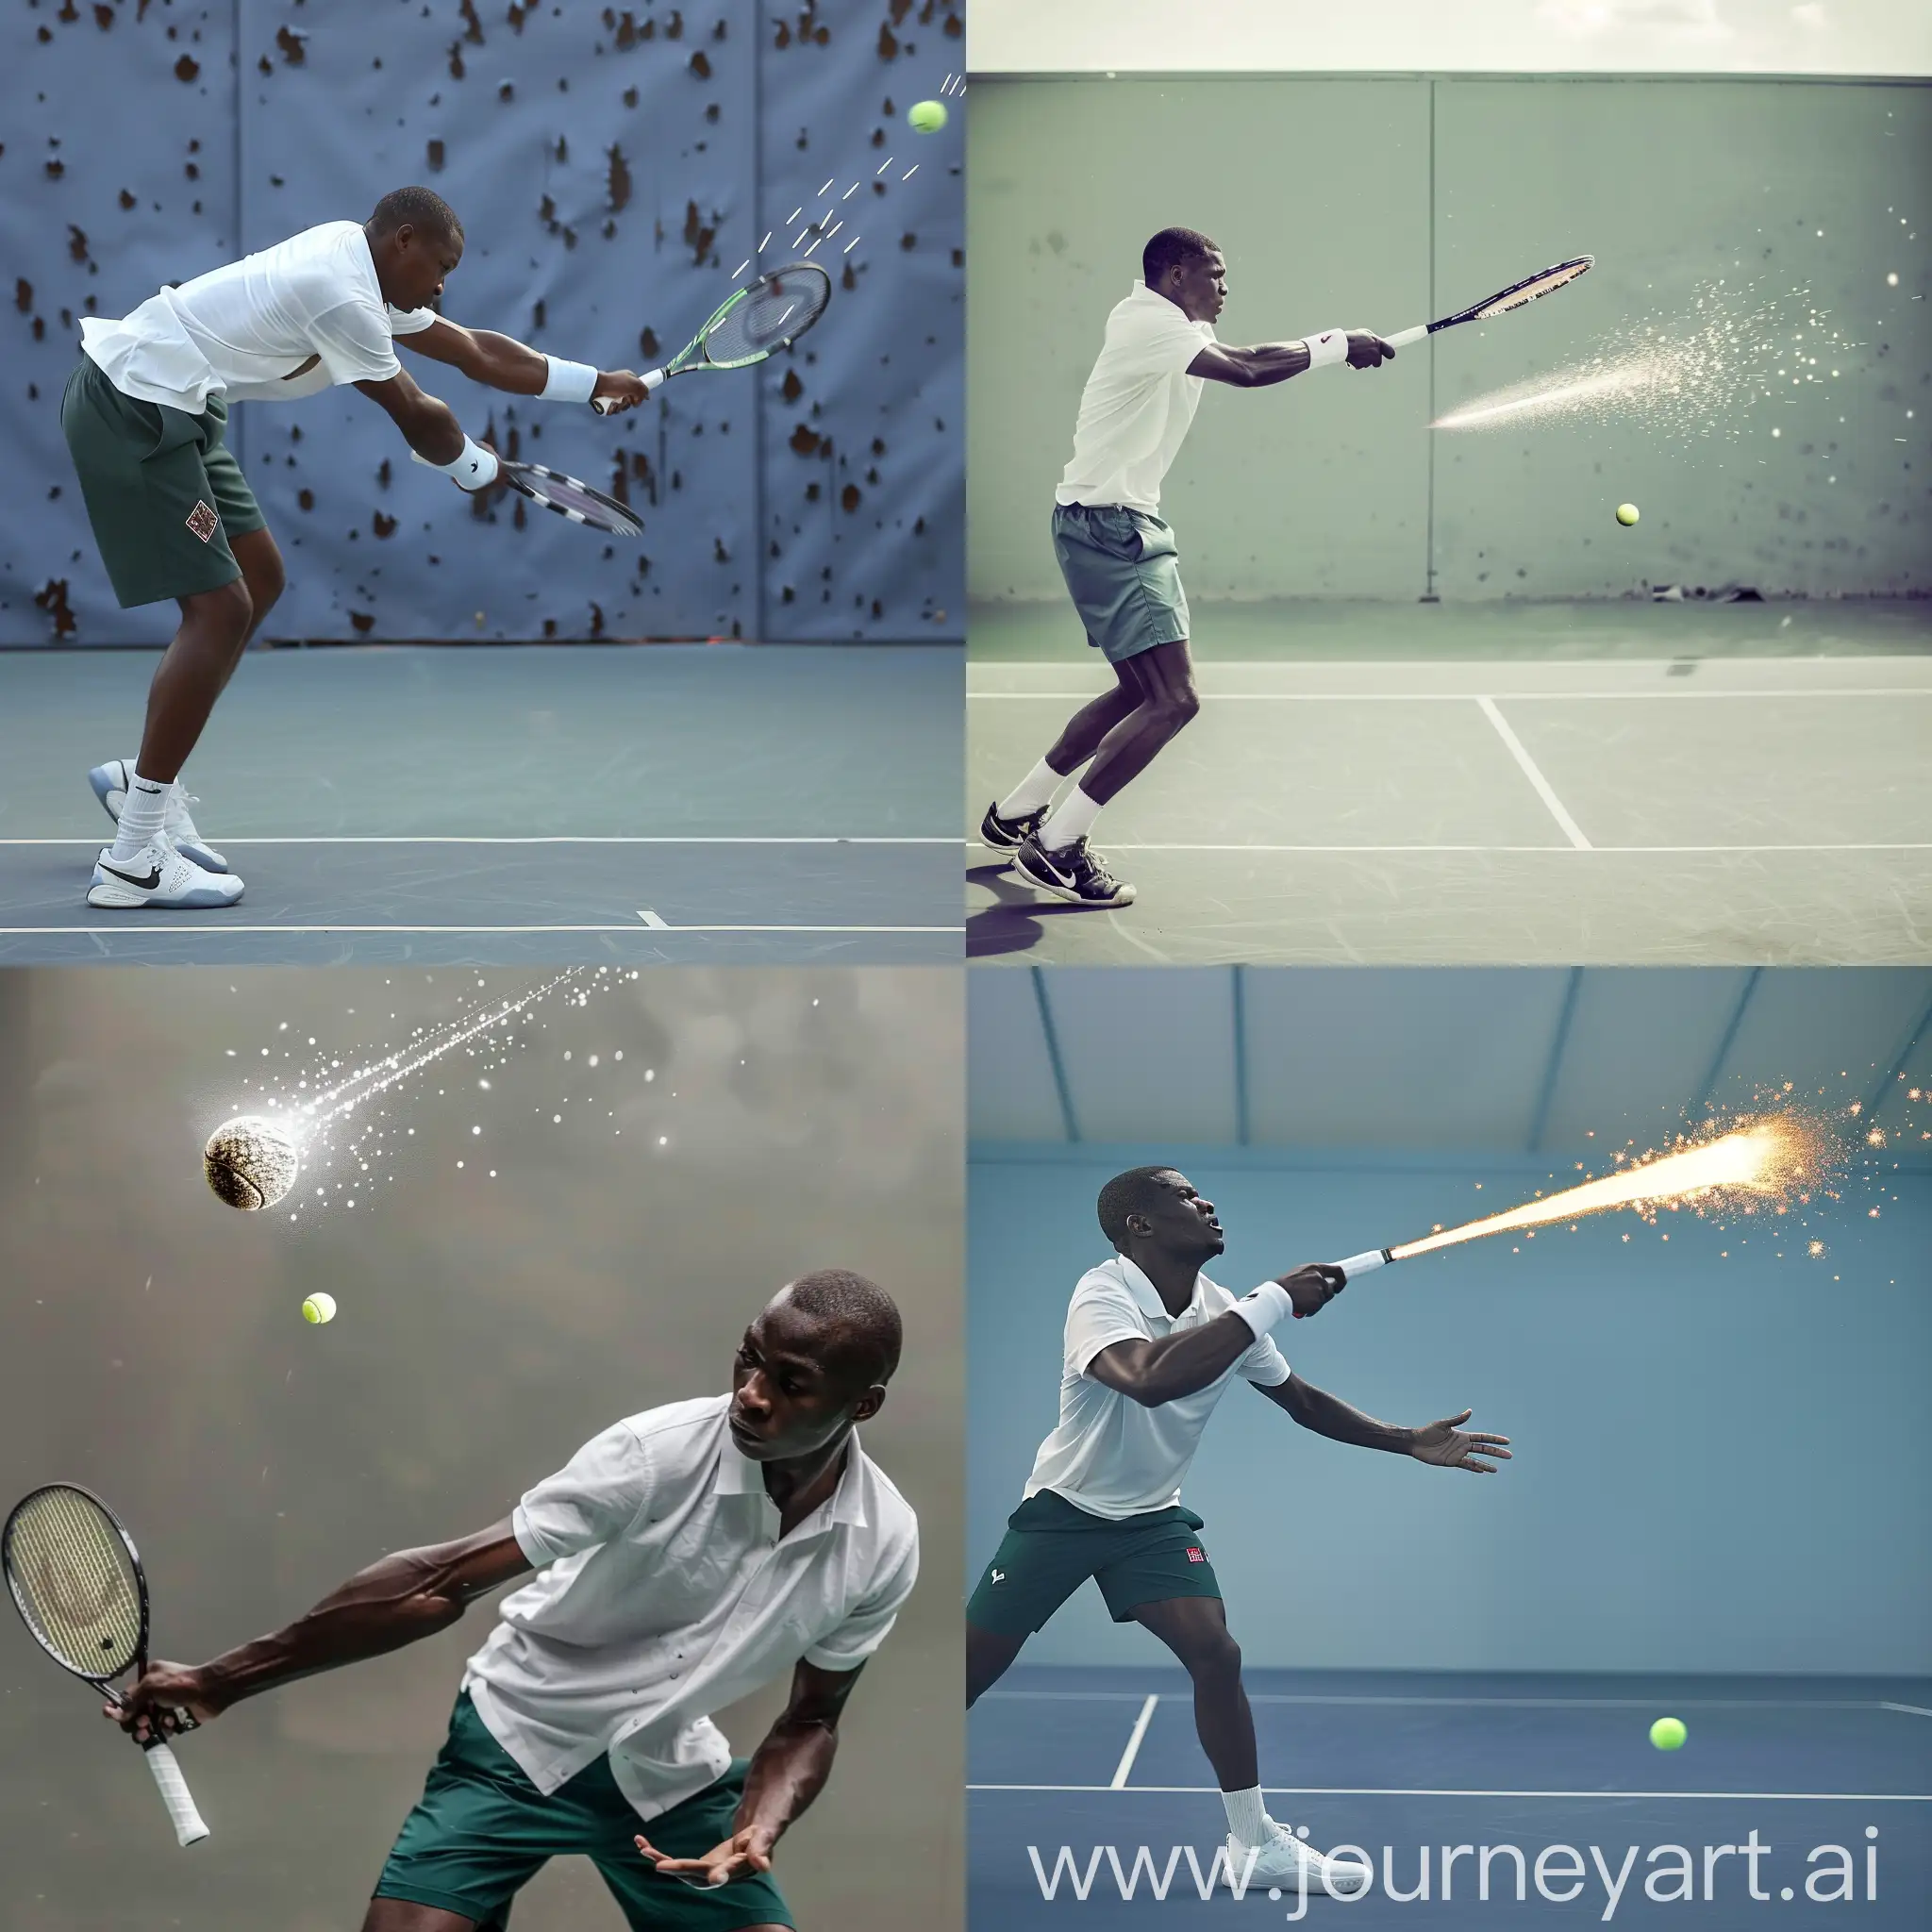 Create a surrealistic sideways medium shot image of a male Nigerian tennis player, wearing white shirt over deep green shorts, as he strikes a small size tennis ball with his racket, the tennis ball streaks across the court like a meteor away from the player